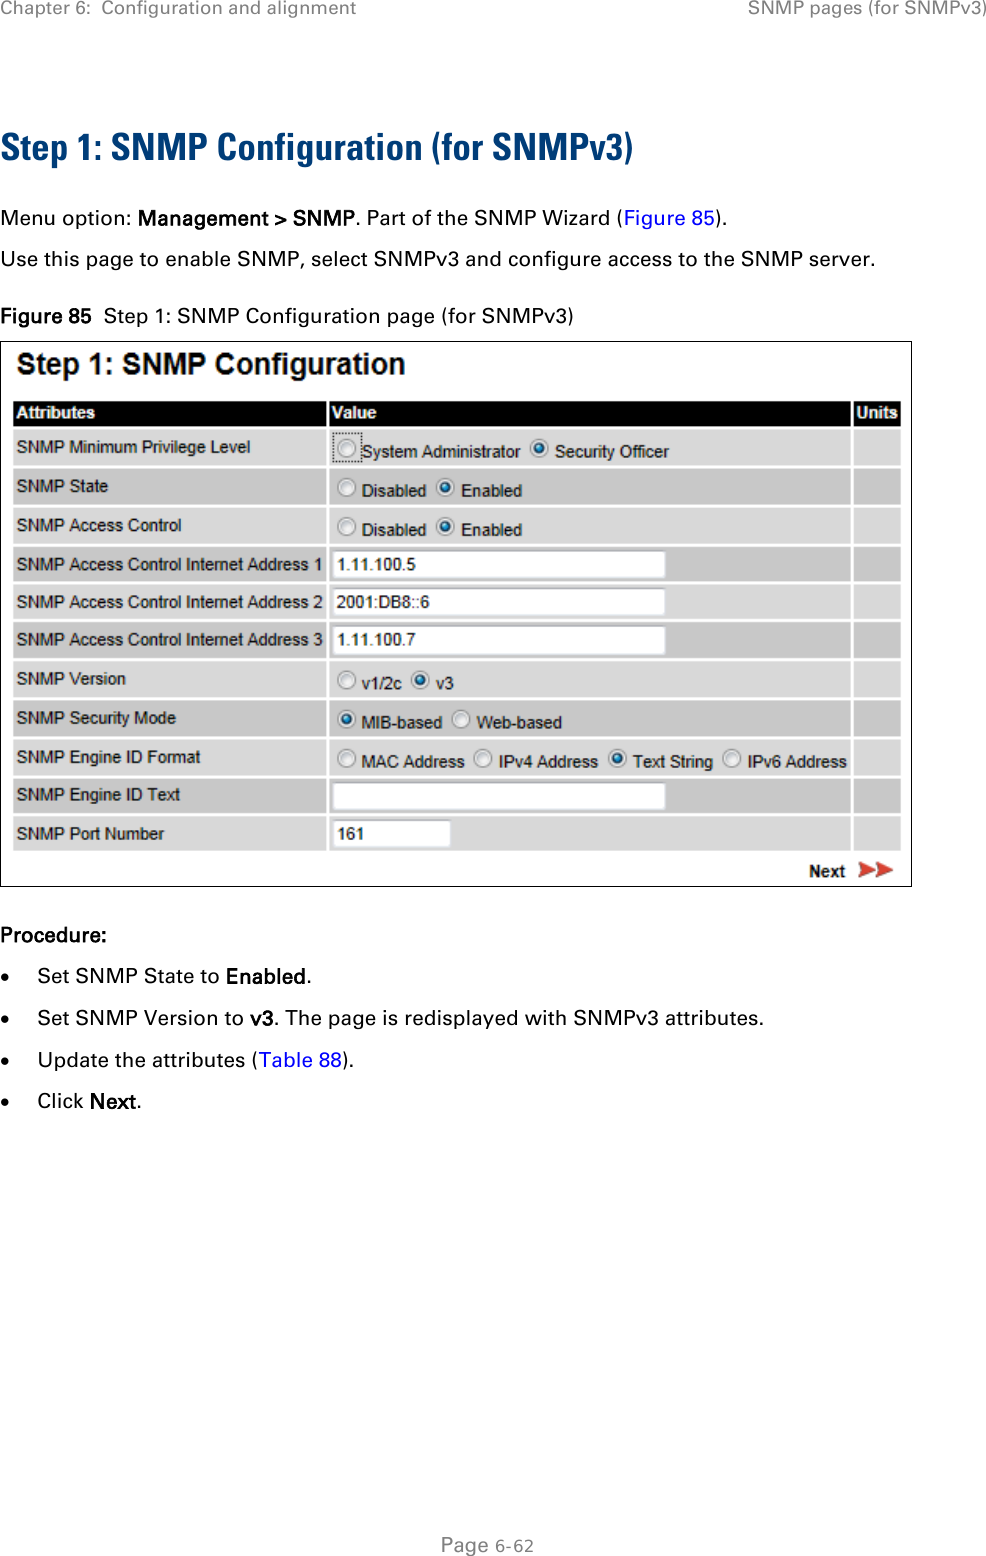 Chapter 6:  Configuration and alignment SNMP pages (for SNMPv3)  Step 1: SNMP Configuration (for SNMPv3) Menu option: Management &gt; SNMP. Part of the SNMP Wizard (Figure 85). Use this page to enable SNMP, select SNMPv3 and configure access to the SNMP server.  Figure 85  Step 1: SNMP Configuration page (for SNMPv3)  Procedure: • Set SNMP State to Enabled. • Set SNMP Version to v3. The page is redisplayed with SNMPv3 attributes. • Update the attributes (Table 88). • Click Next.   Page 6-62 